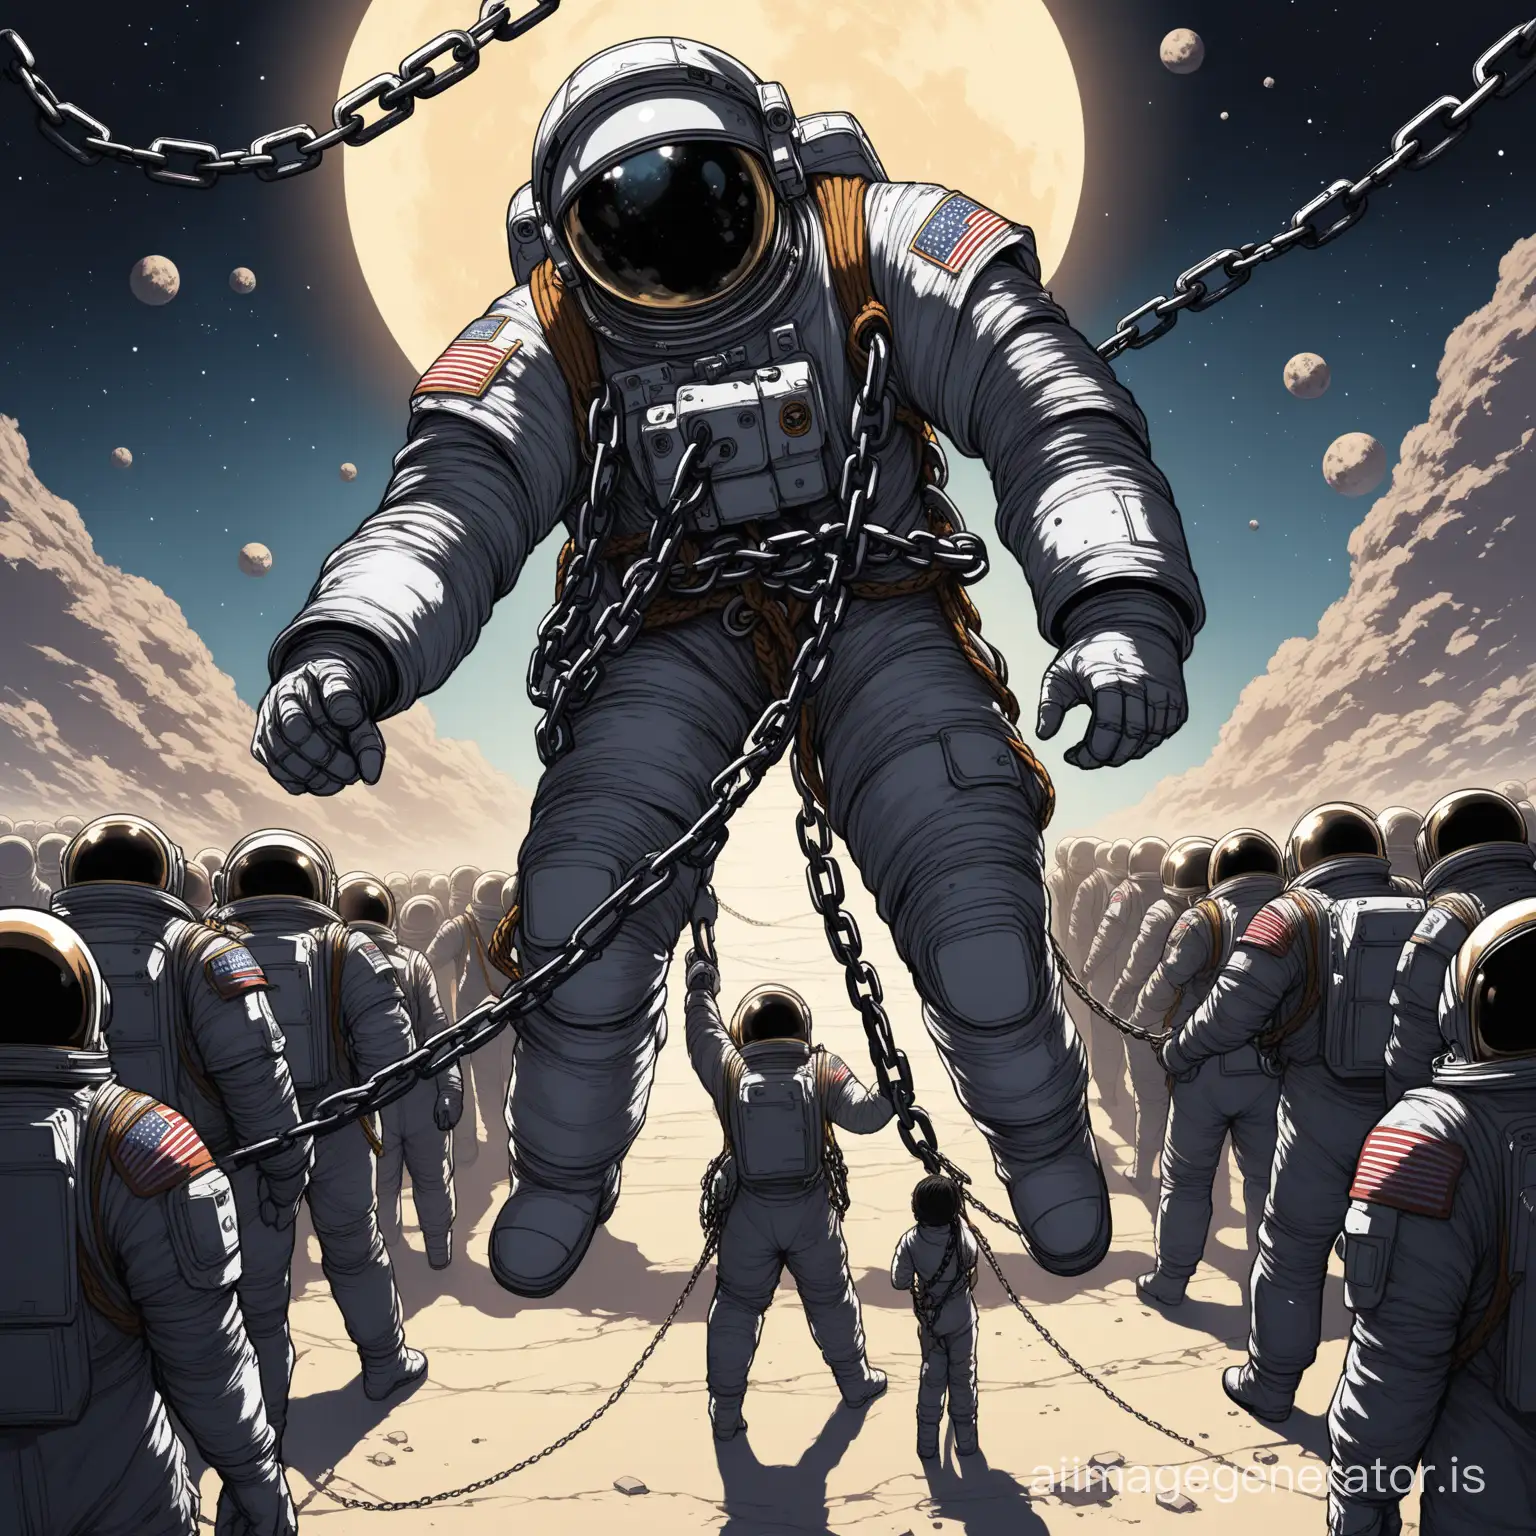 The evil tyrant astronaut pulls a huge chain of the astronaut slave, with slaves standing around in chains